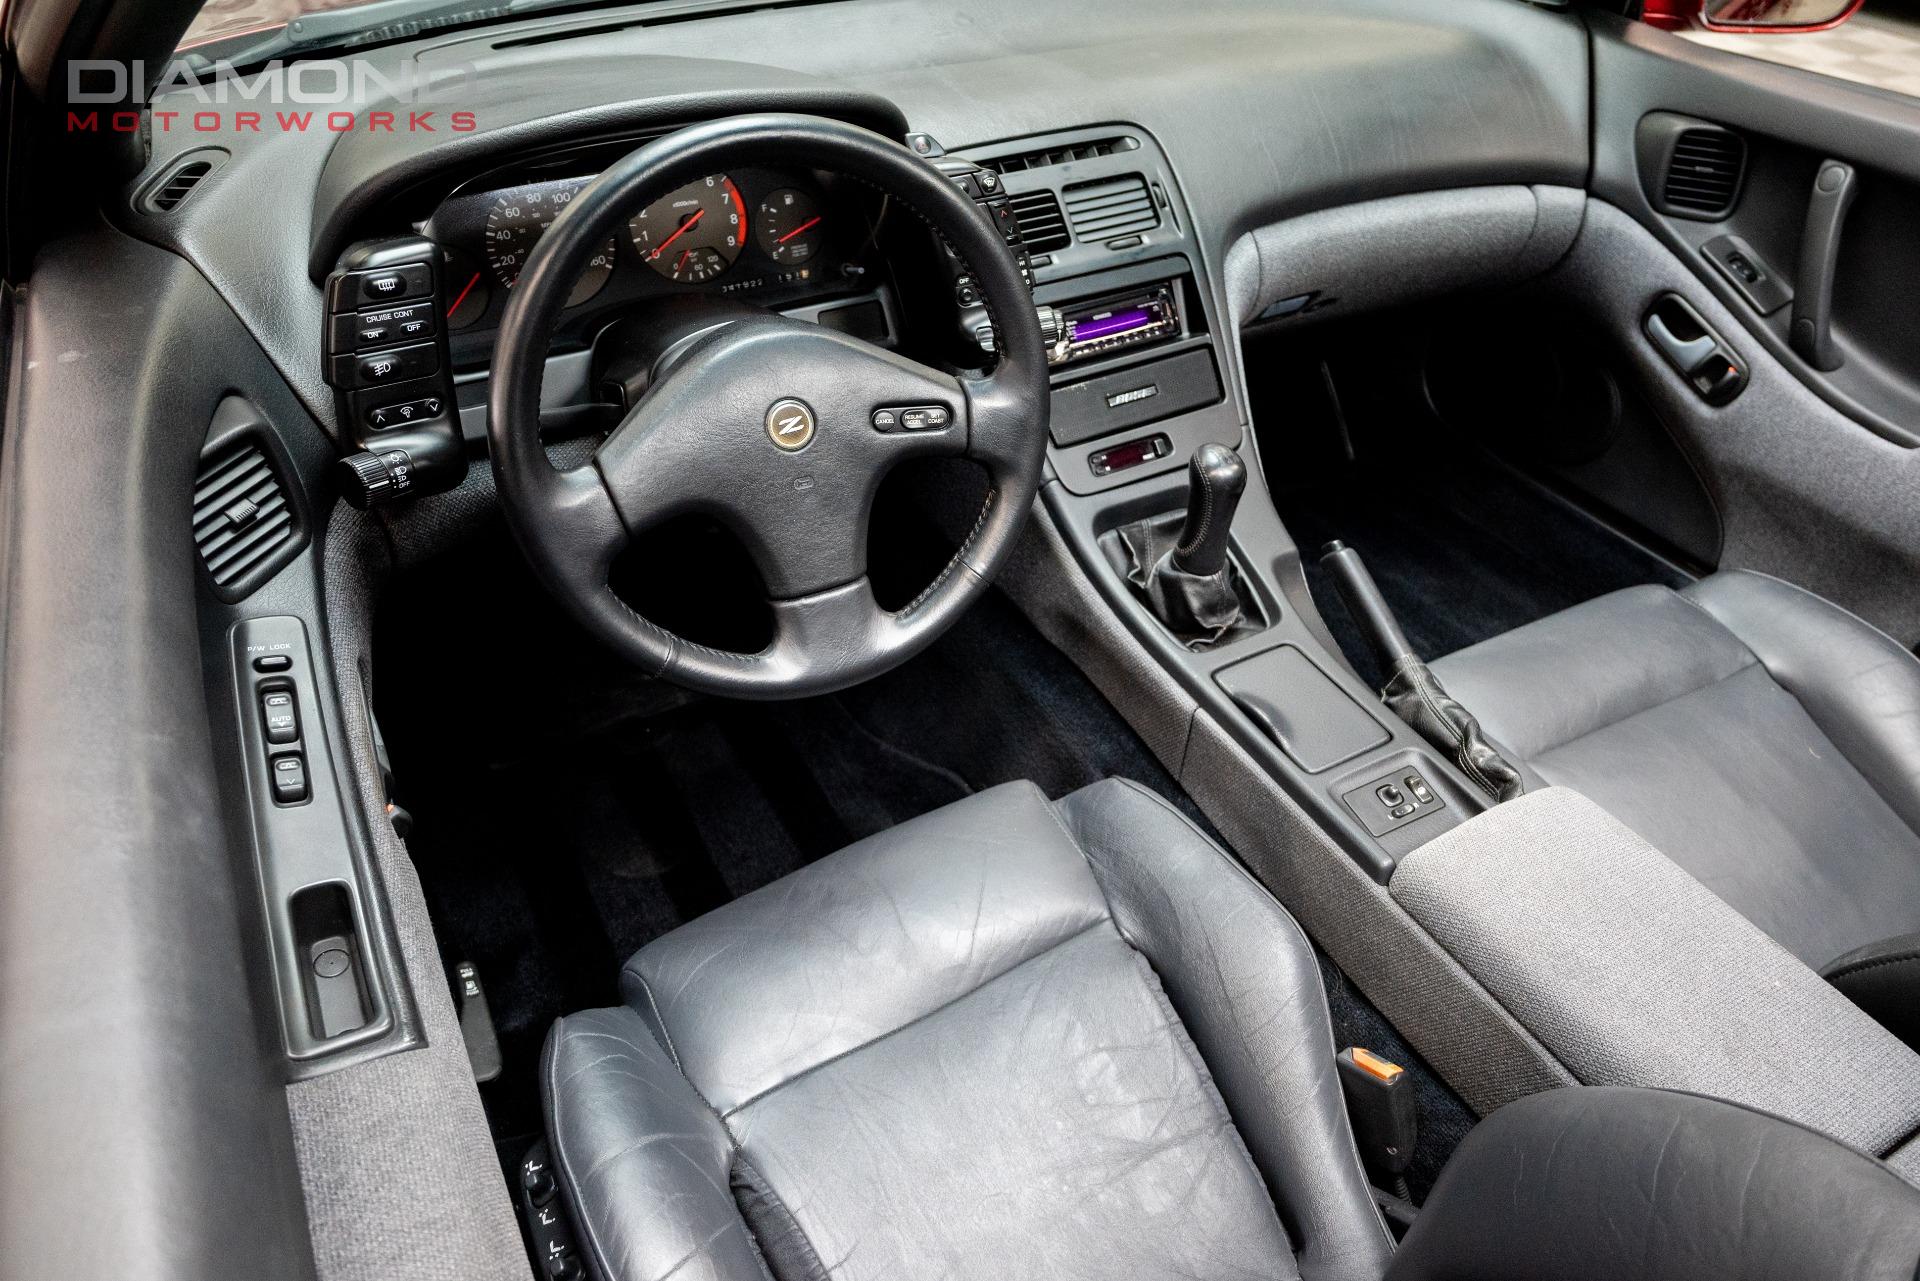 Used 1990 Nissan 300ZX GS For Sale (Sold) | Diamond Motorworks 